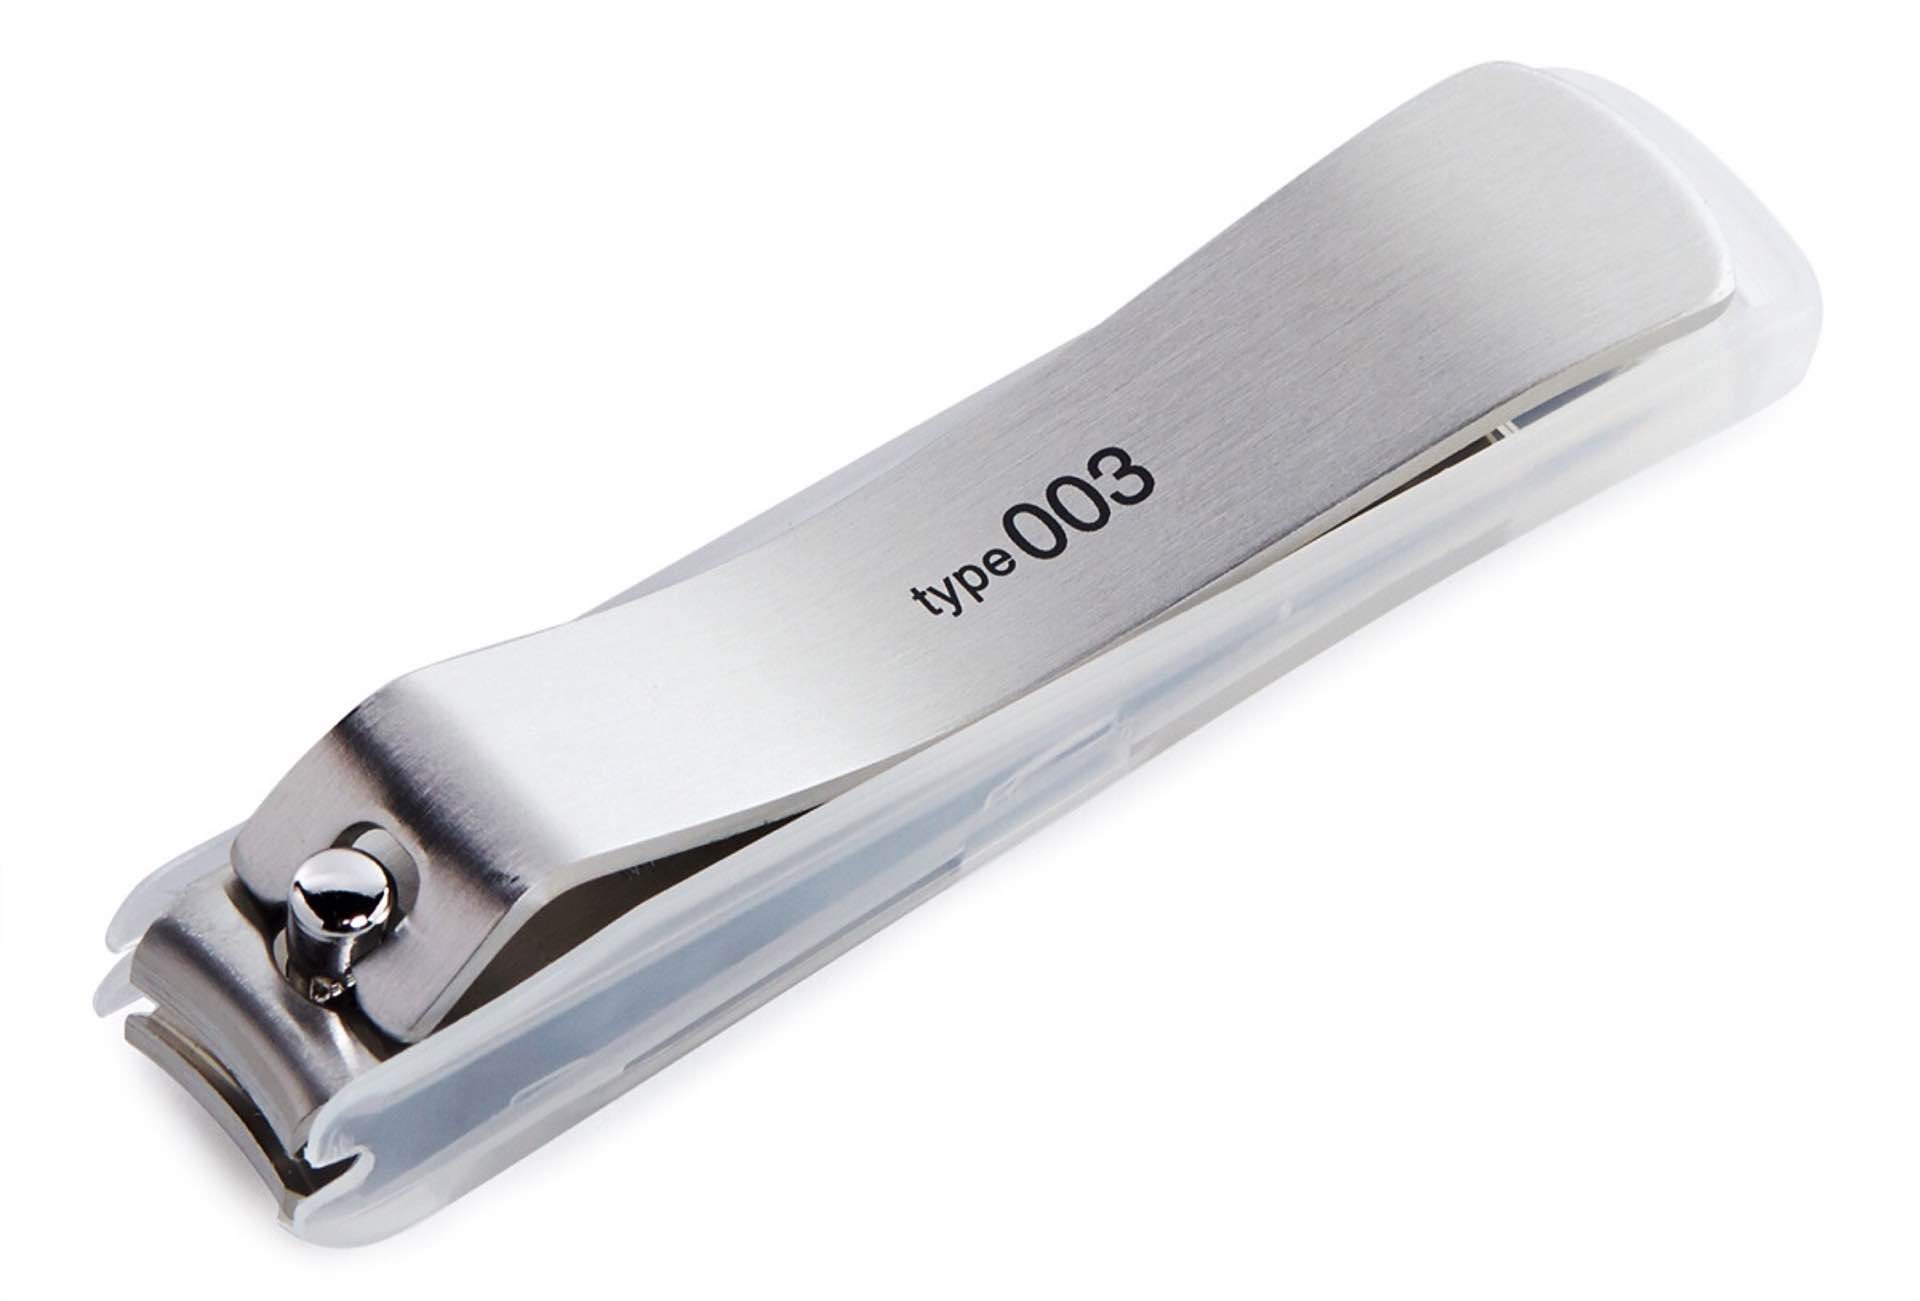 Kai's 003 S nail clippers. ($7)